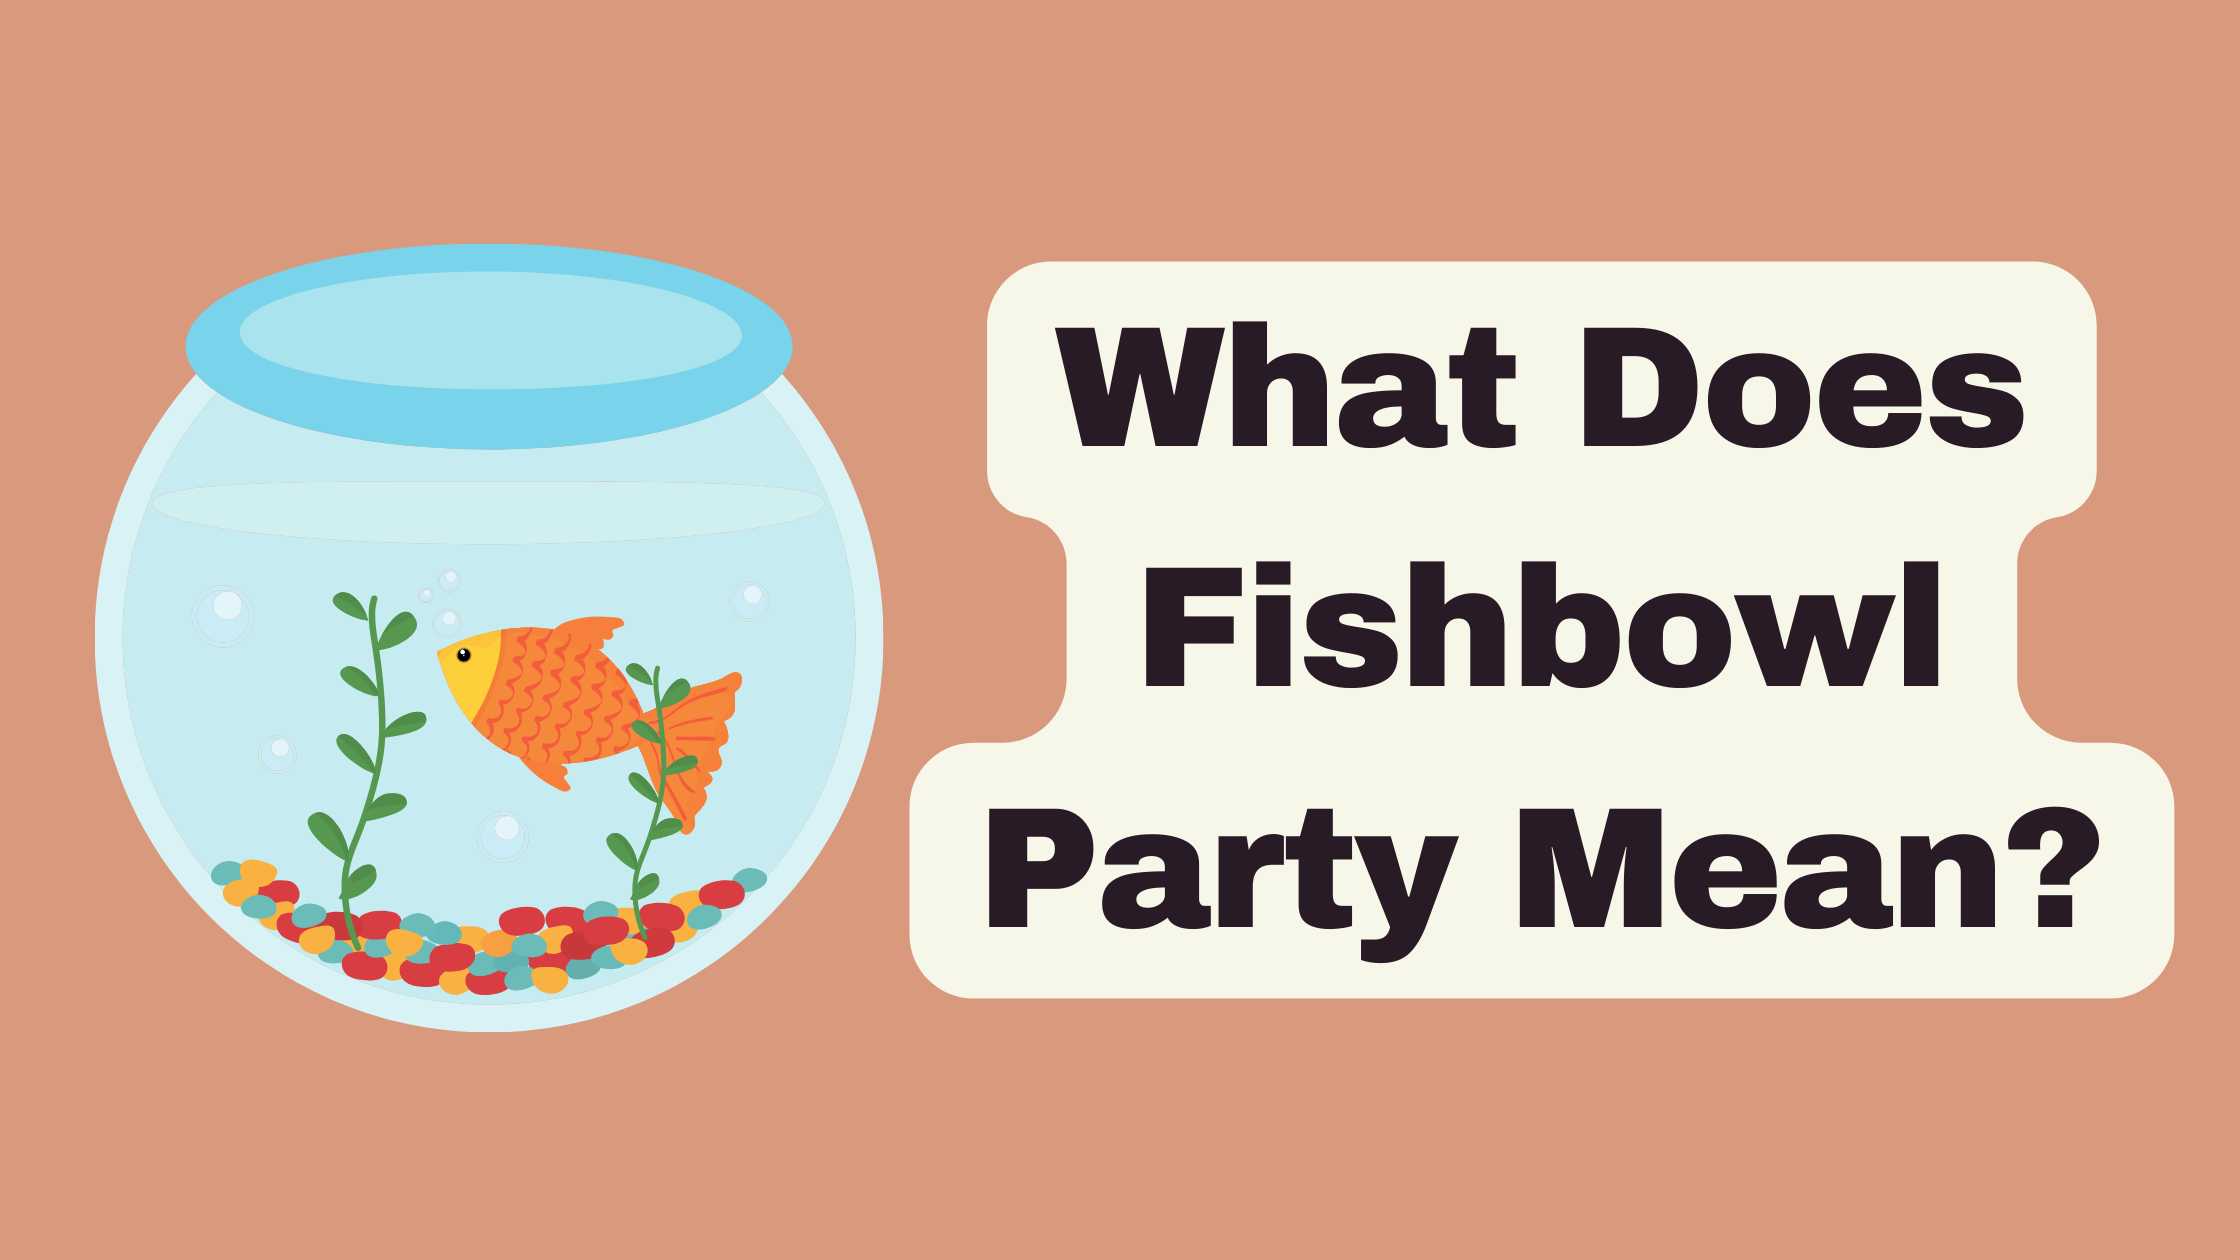 Fishbowl Party Meaning